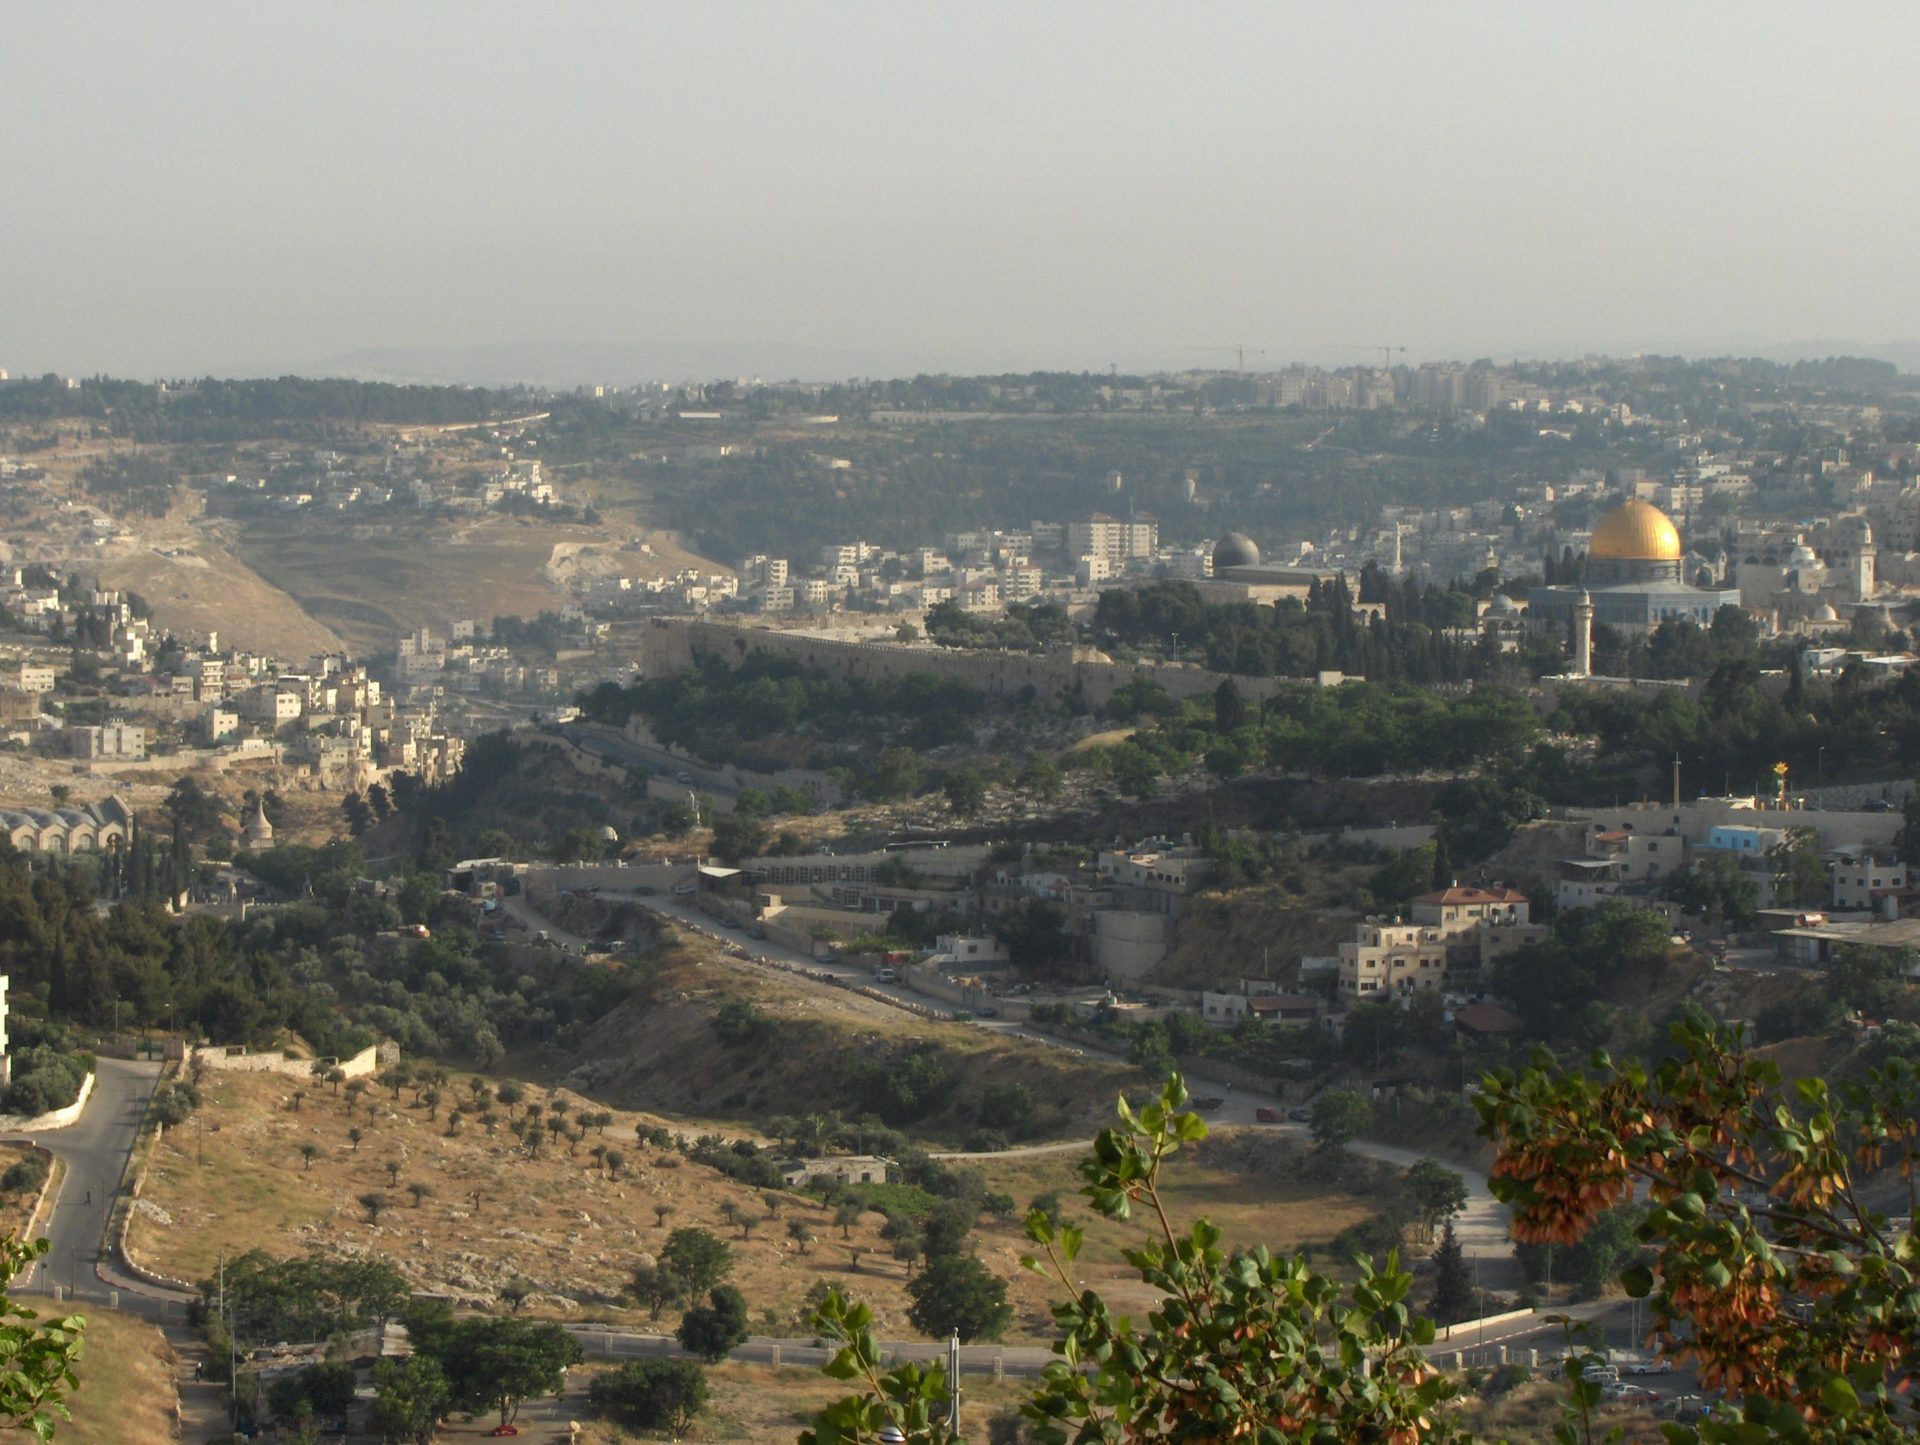 A view of the city of Jerusalem from across the Kidron Valley.